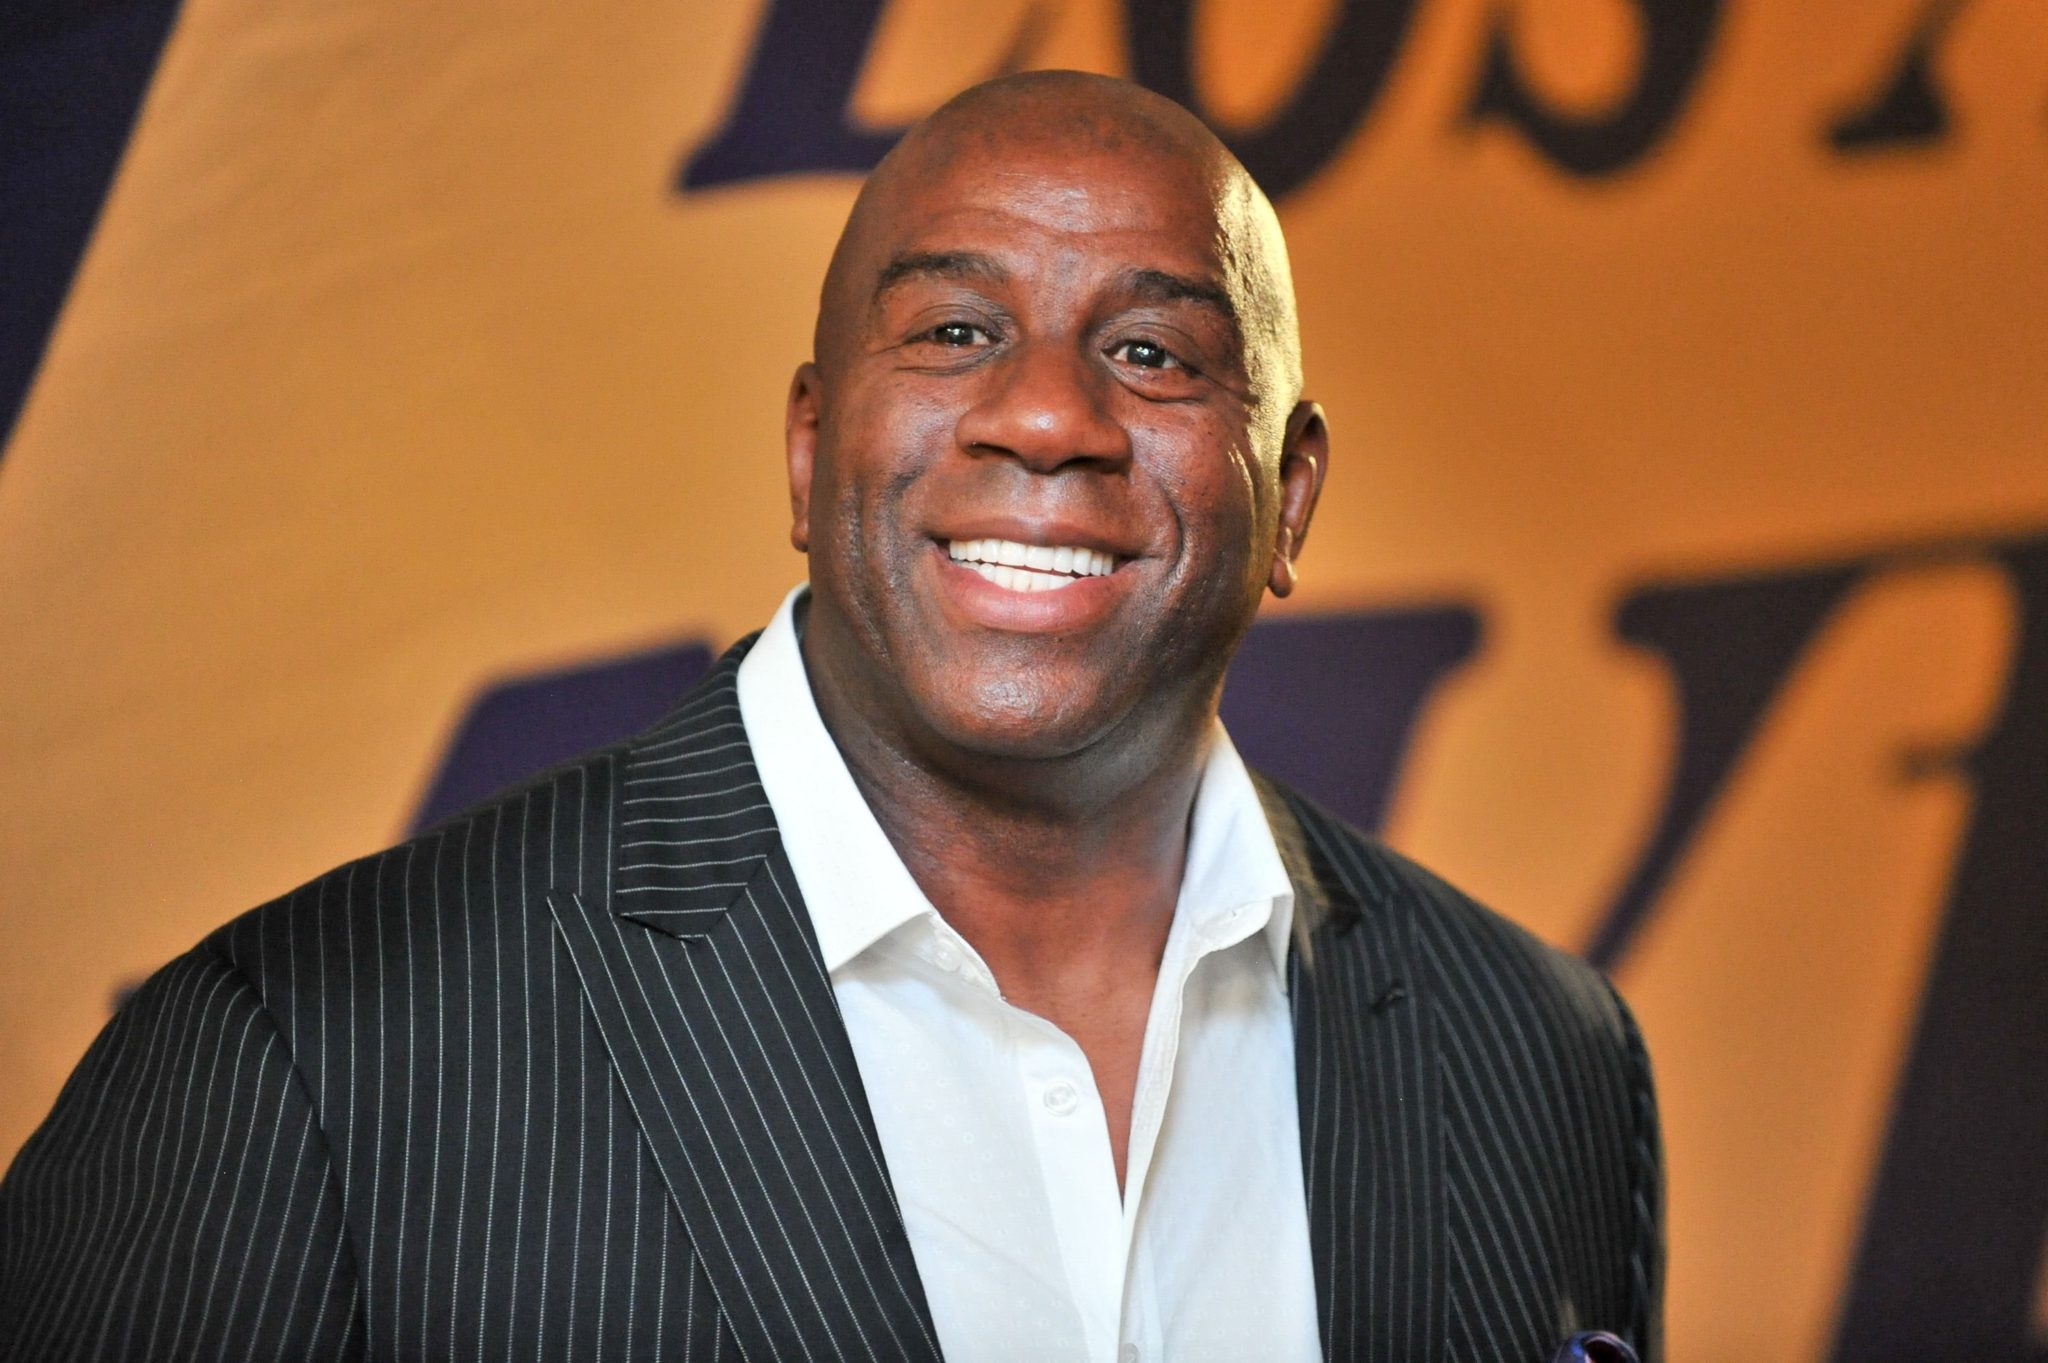 Magic Johnson at an appearance for the Lakers